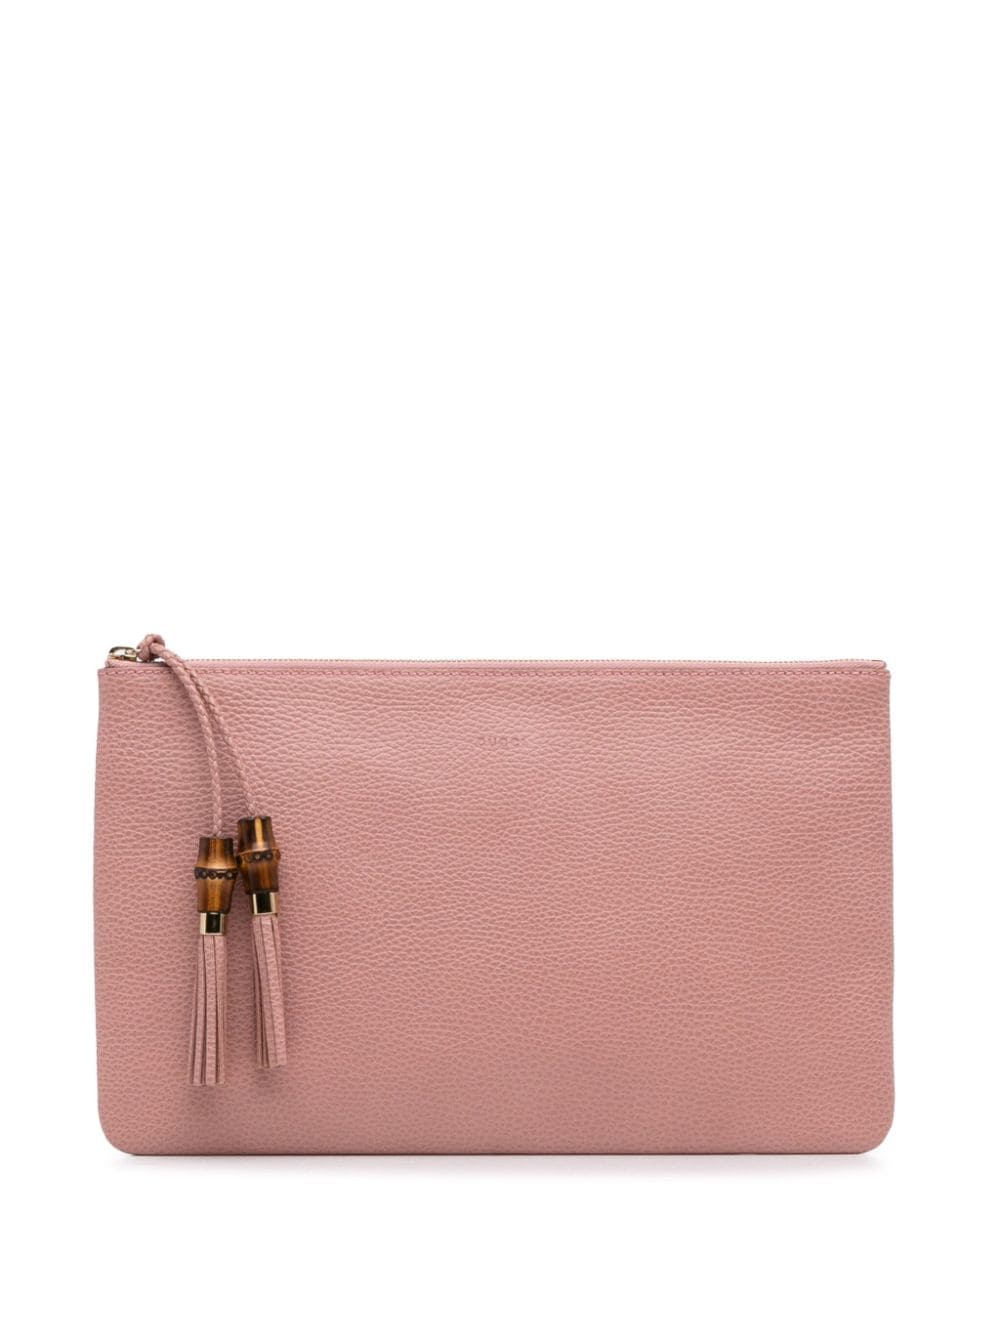 Pre-owned Gucci 2000-2015 Bamboo Tassel Leather Clutch Bag In Pink